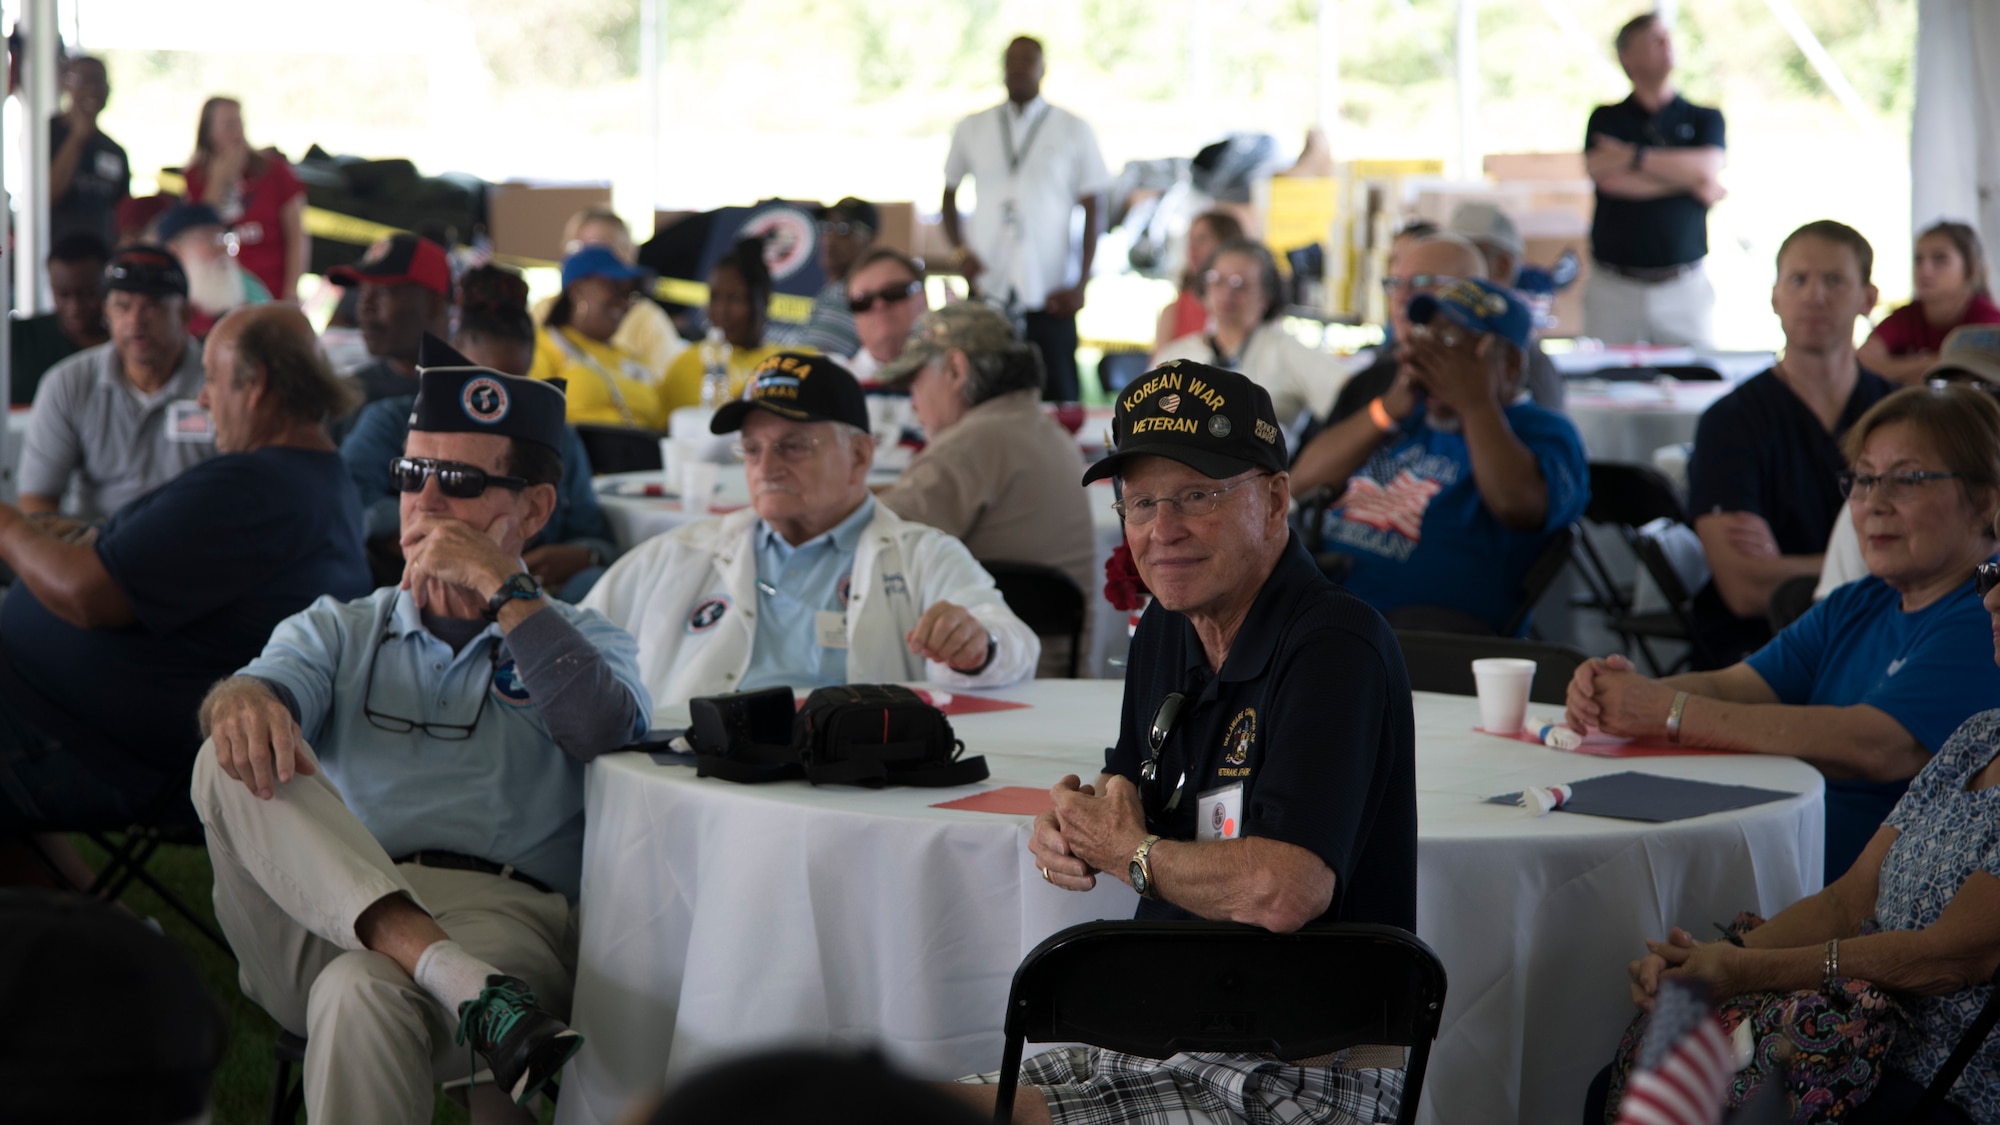 Military veterans attend the 10th annual Delaware Veterans Stand Down Sept. 21, 2018, at Schutte Park in Dover, Delaware. More than 1,000 Delaware military veterans attended this year’s event. (U.S. Air Force photo by Staff Sgt. Zachary Cacicia)